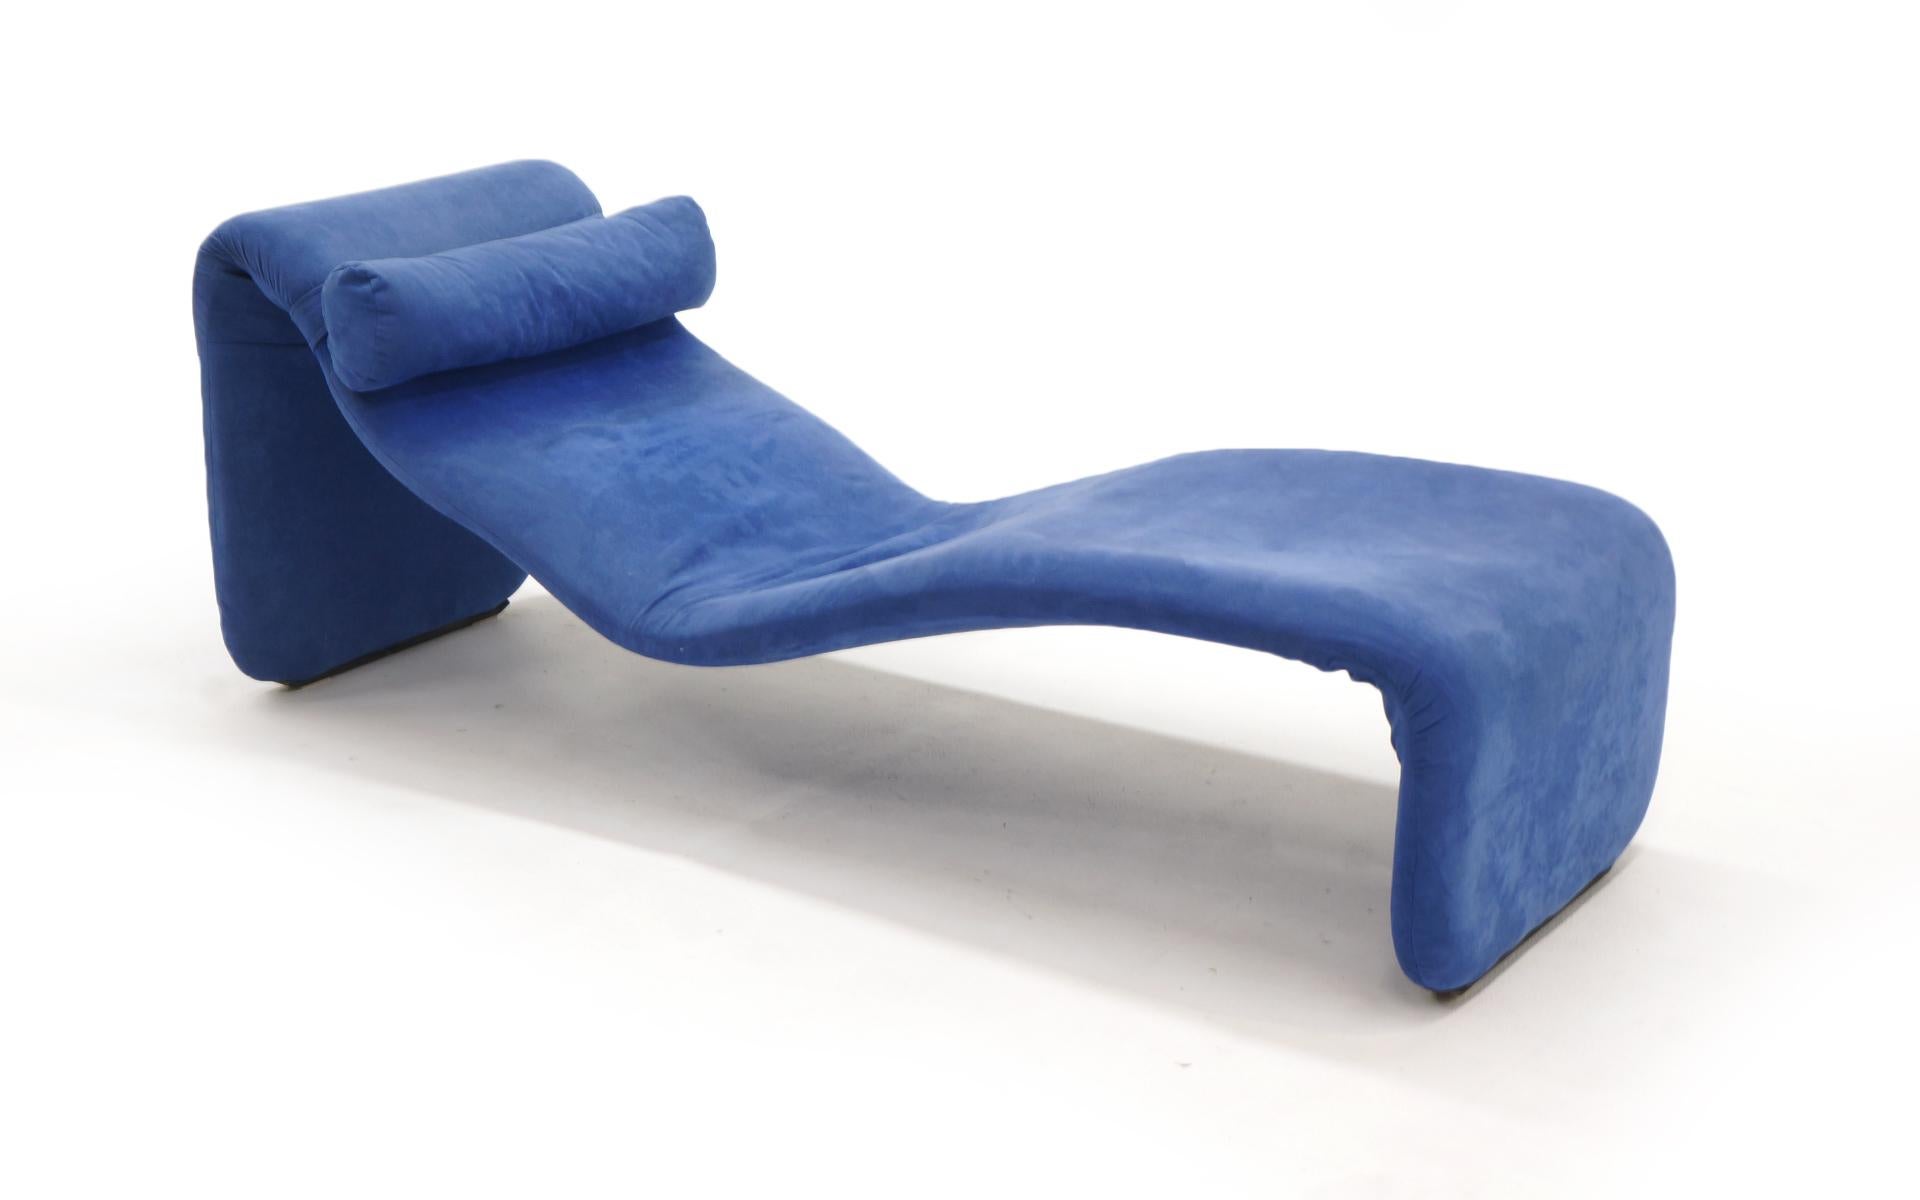 Djinn chaise designed by Olivier Mourgue for Airborne International, France, 1960s. Very comfortable. Very good condition.